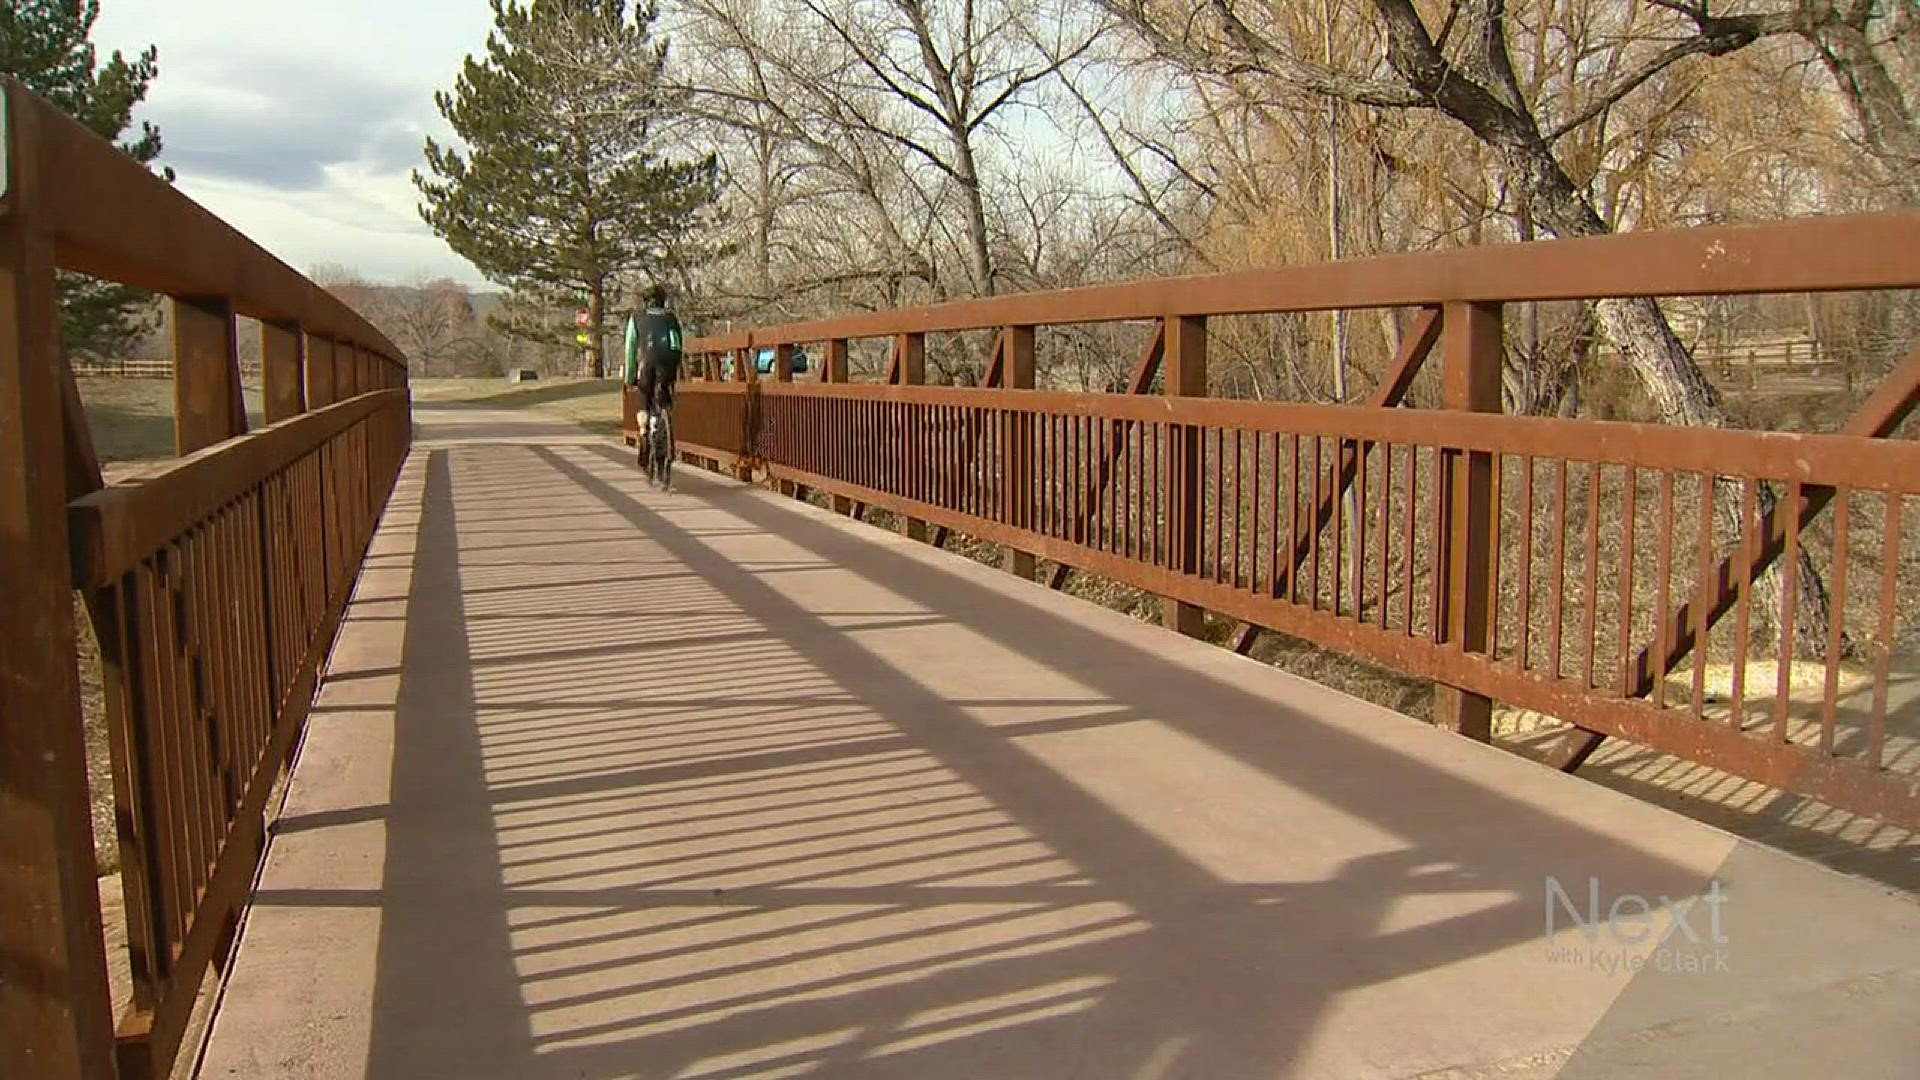 Fort Collins has been waiting decades to complete a trail system linking one side of town to the other. That came Monday when the city officially opened the Fossil Creek Trail.